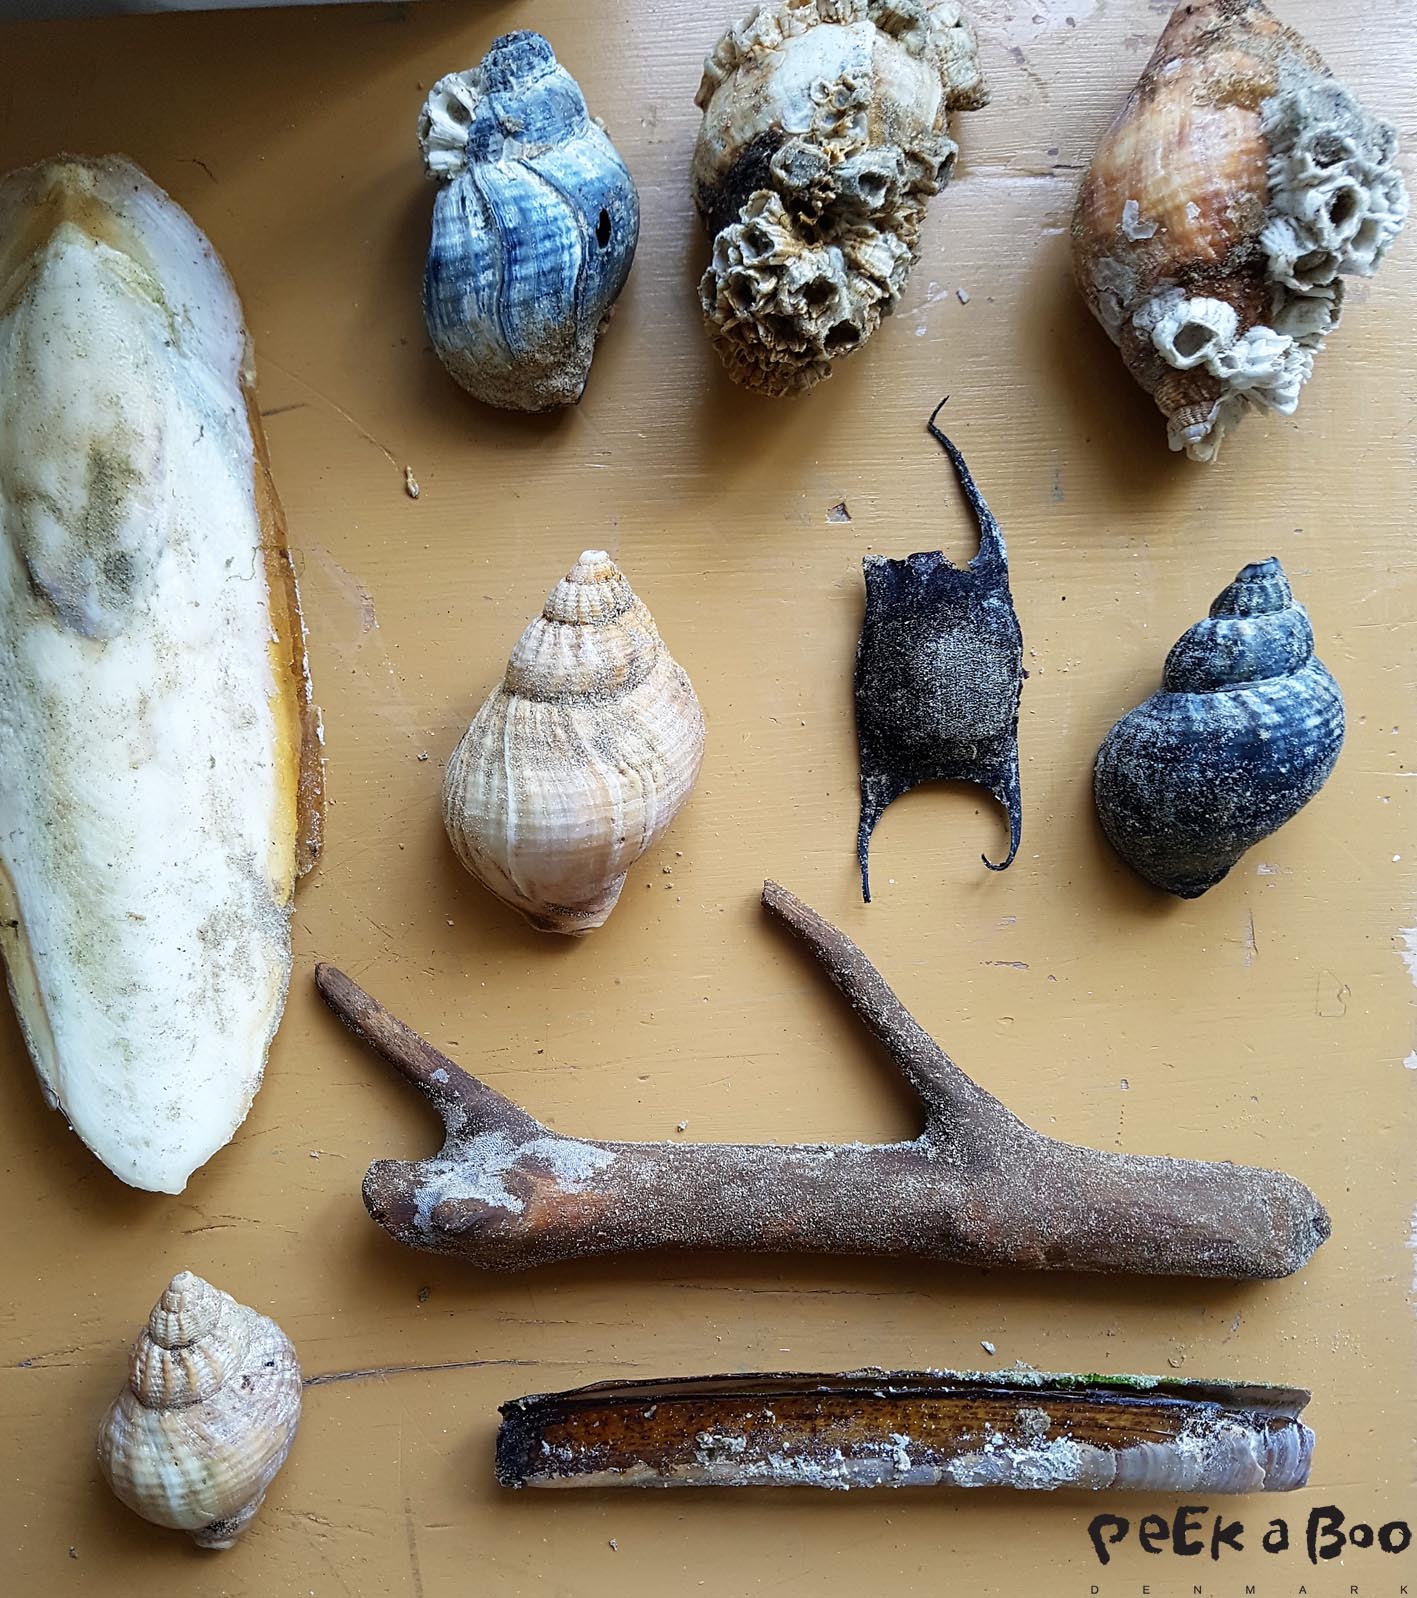 Beach finds from the Wadden Sea. Stingrays egg, seashells, drift wood, clam and carapace from an octopus.